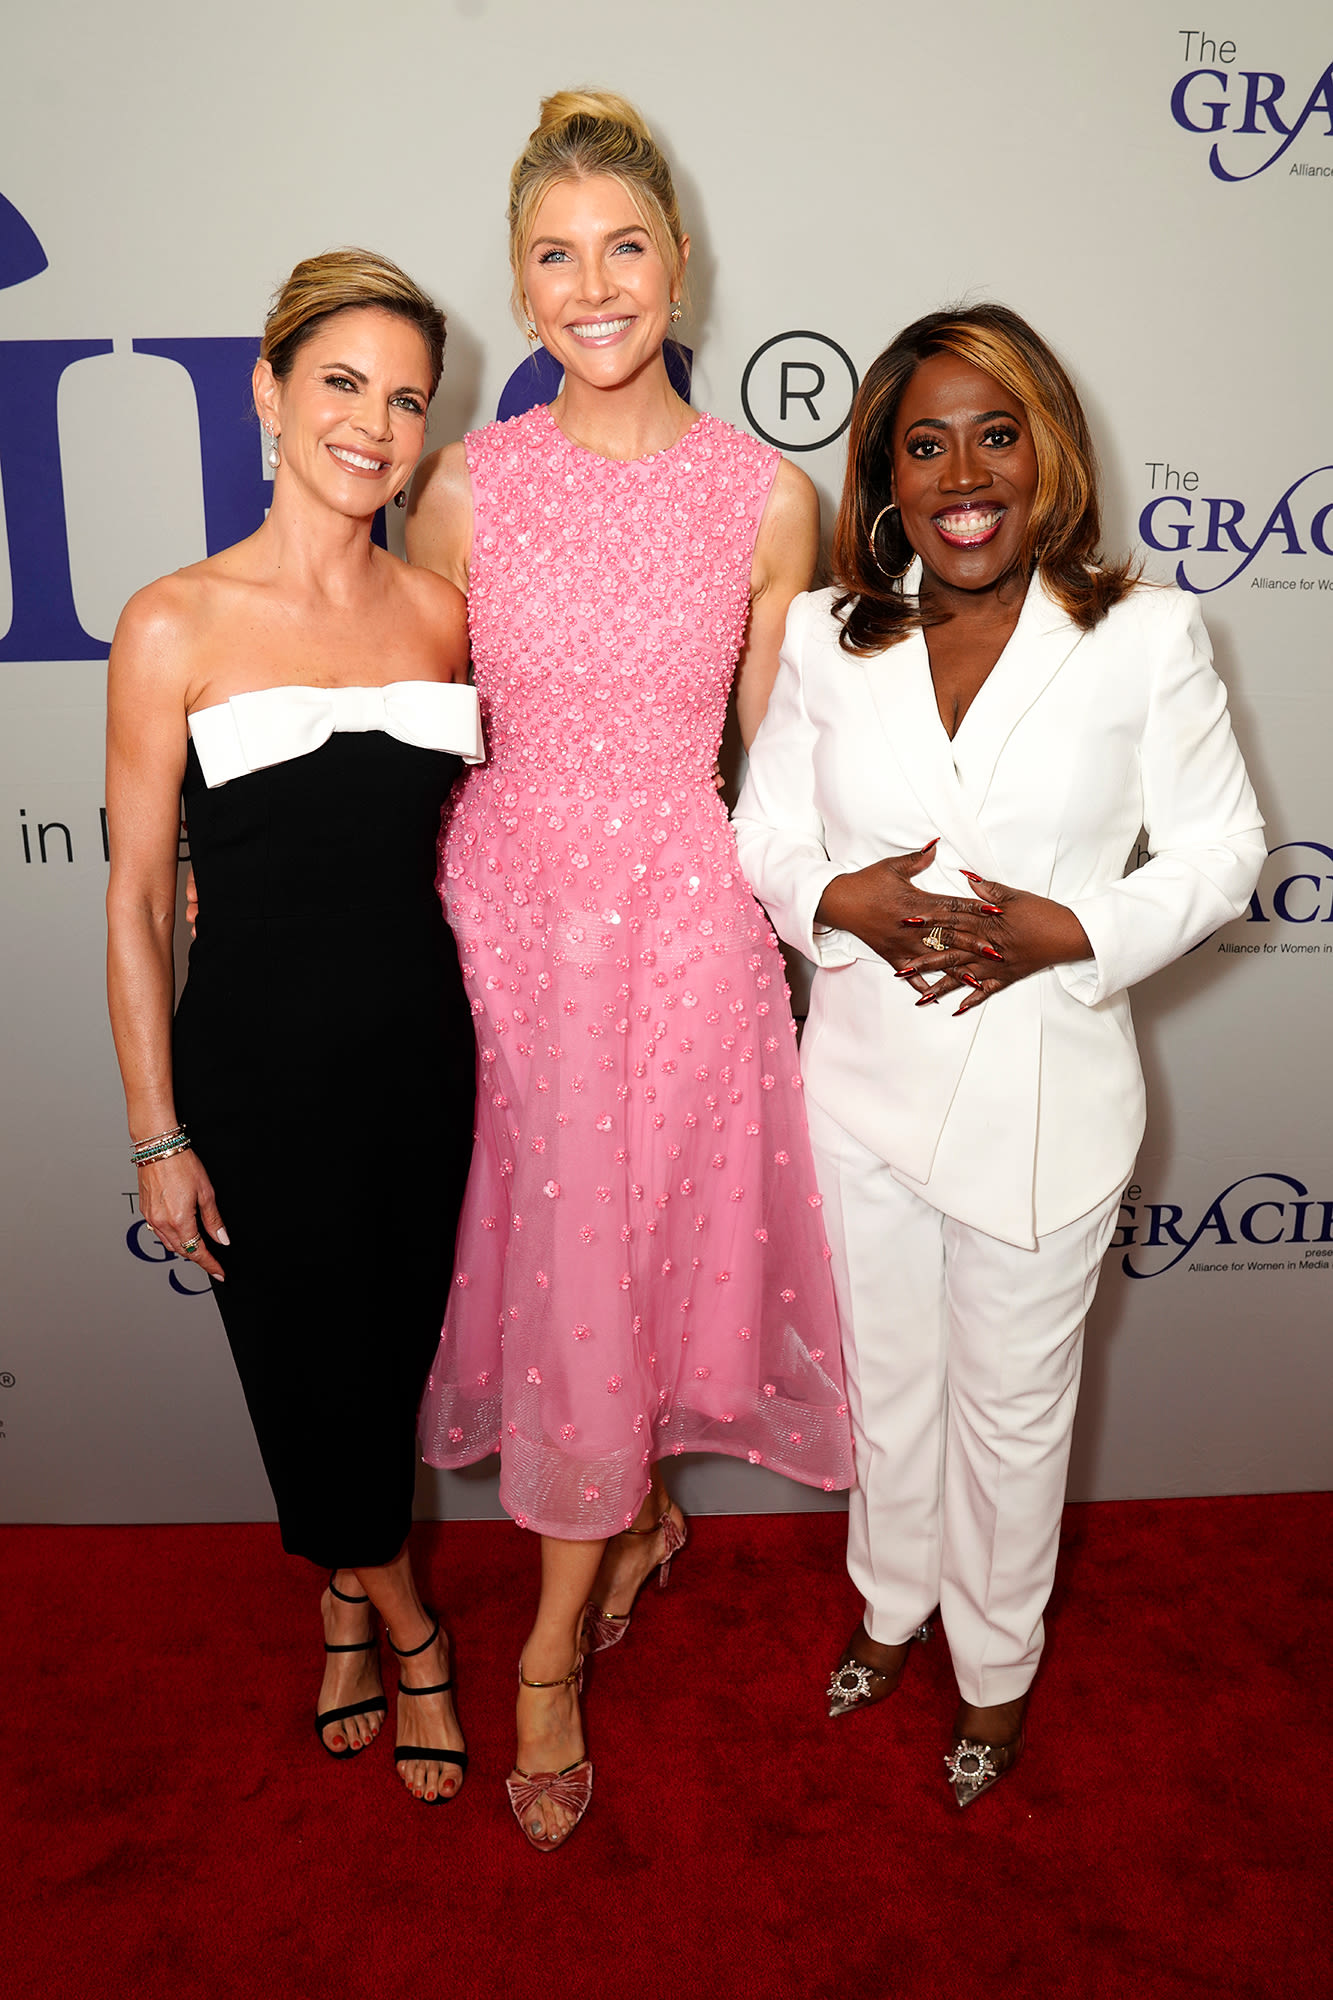 The Talk’s Amanda Kloots, Sheryl Underwood and Natalie Morales Want to Give the Show a ‘Great Ending’